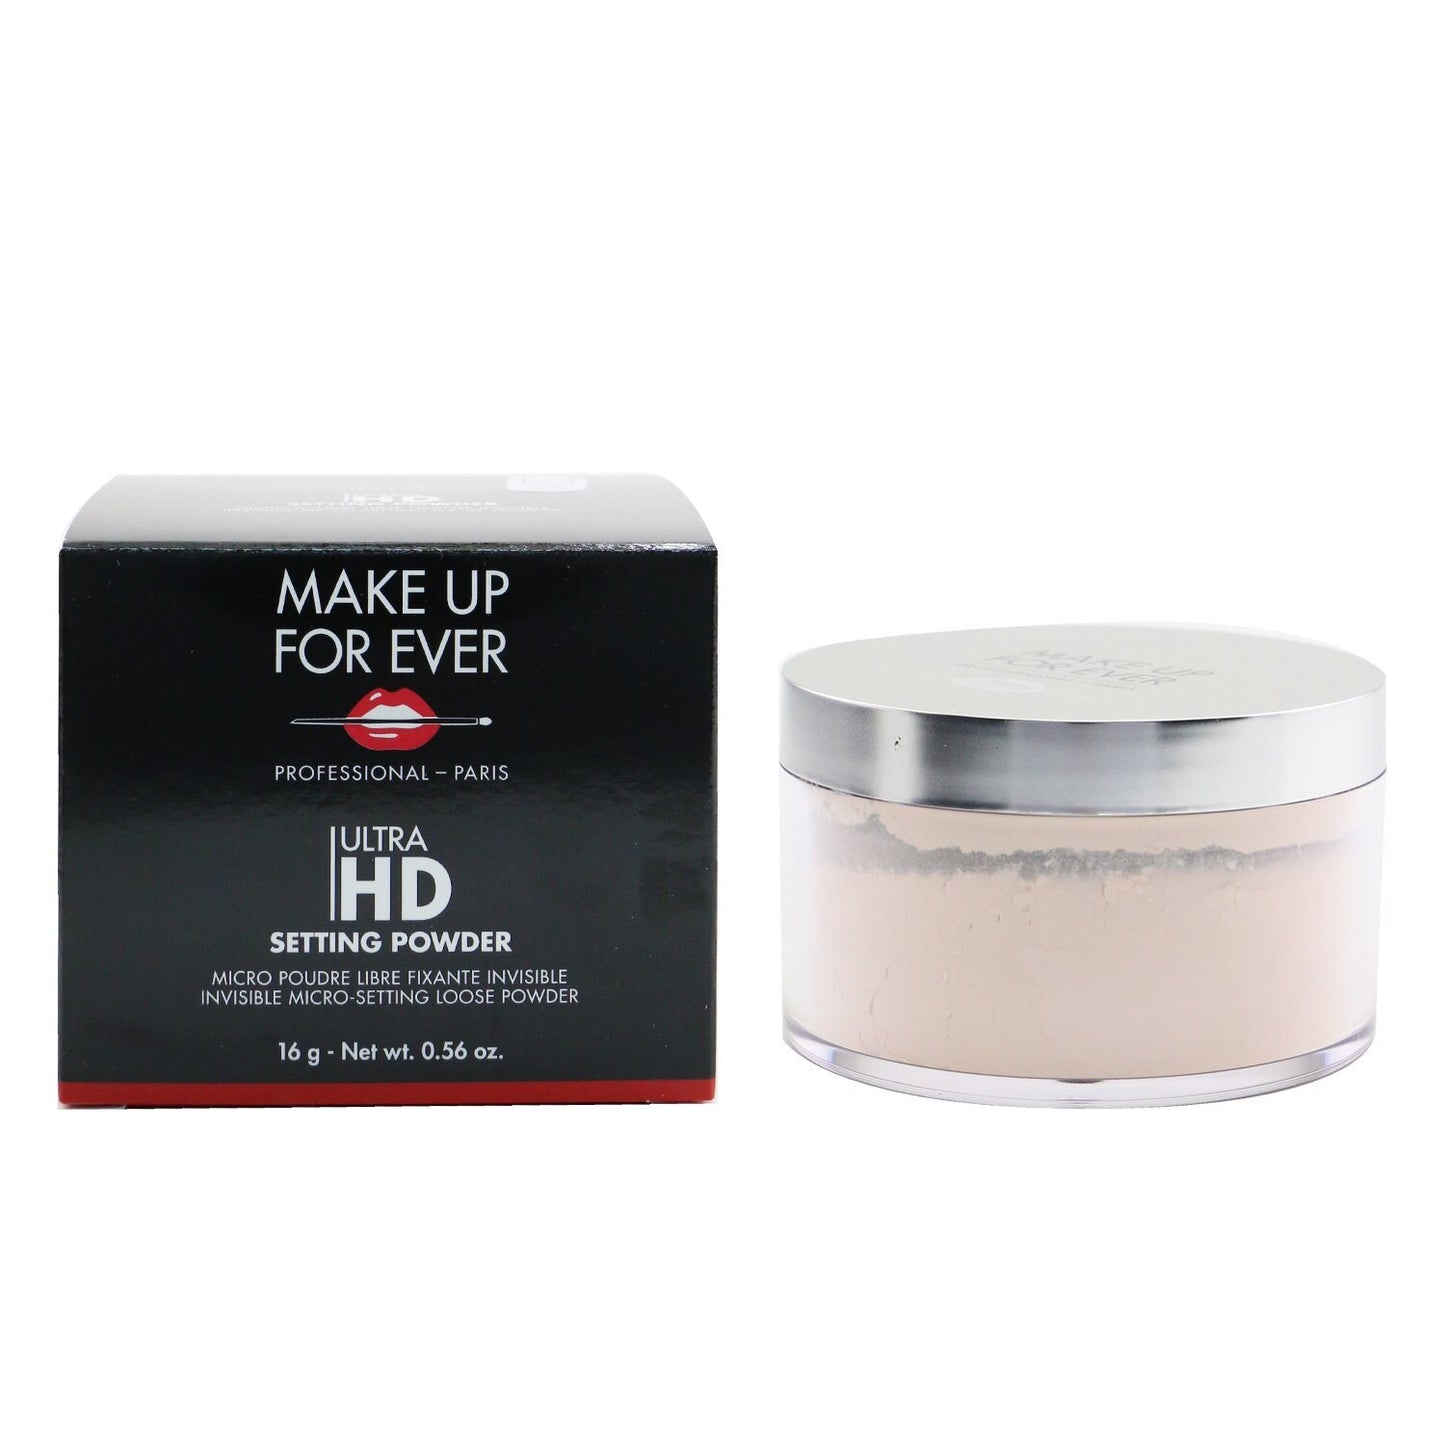 MAKE UP FOR EVER - Ultra HD Invisible Micro Setting Loose Powder - # 1.1 Pale Rose I000018611 / 174787 16g/0.56oz